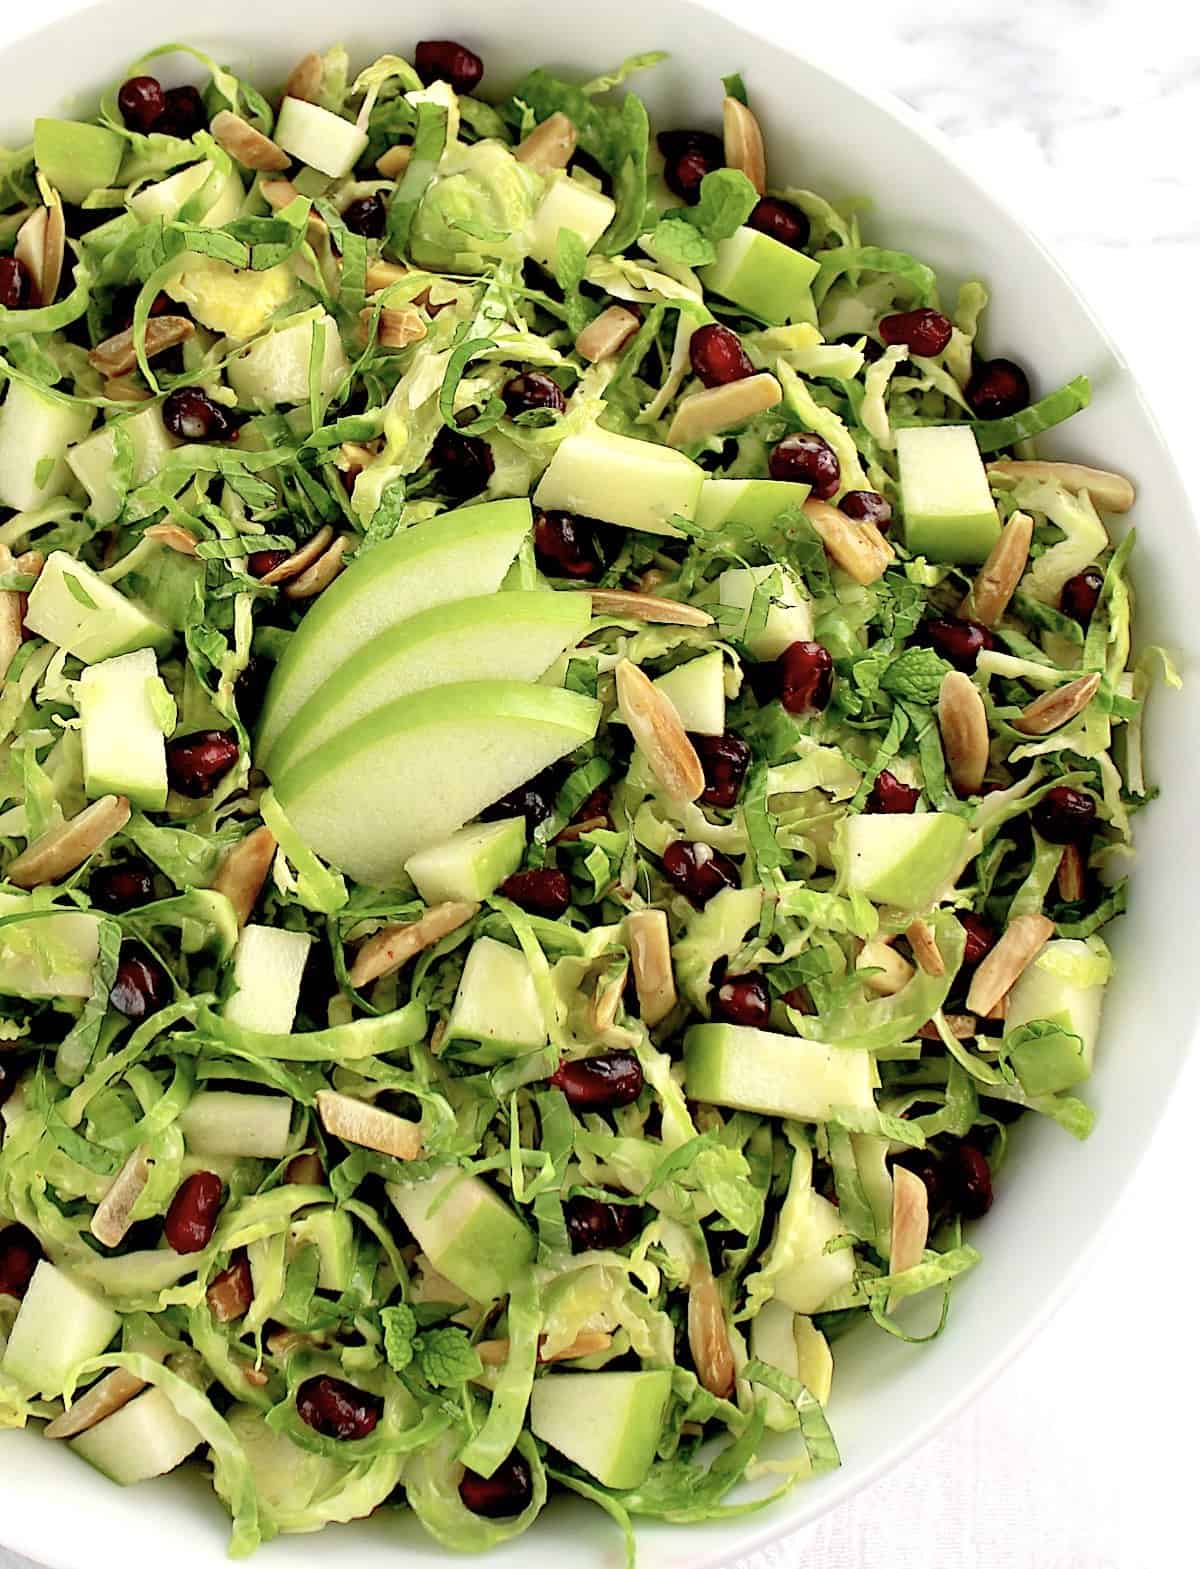 Shredded Brussels Sprouts Salad with 3 sliced green apples in center